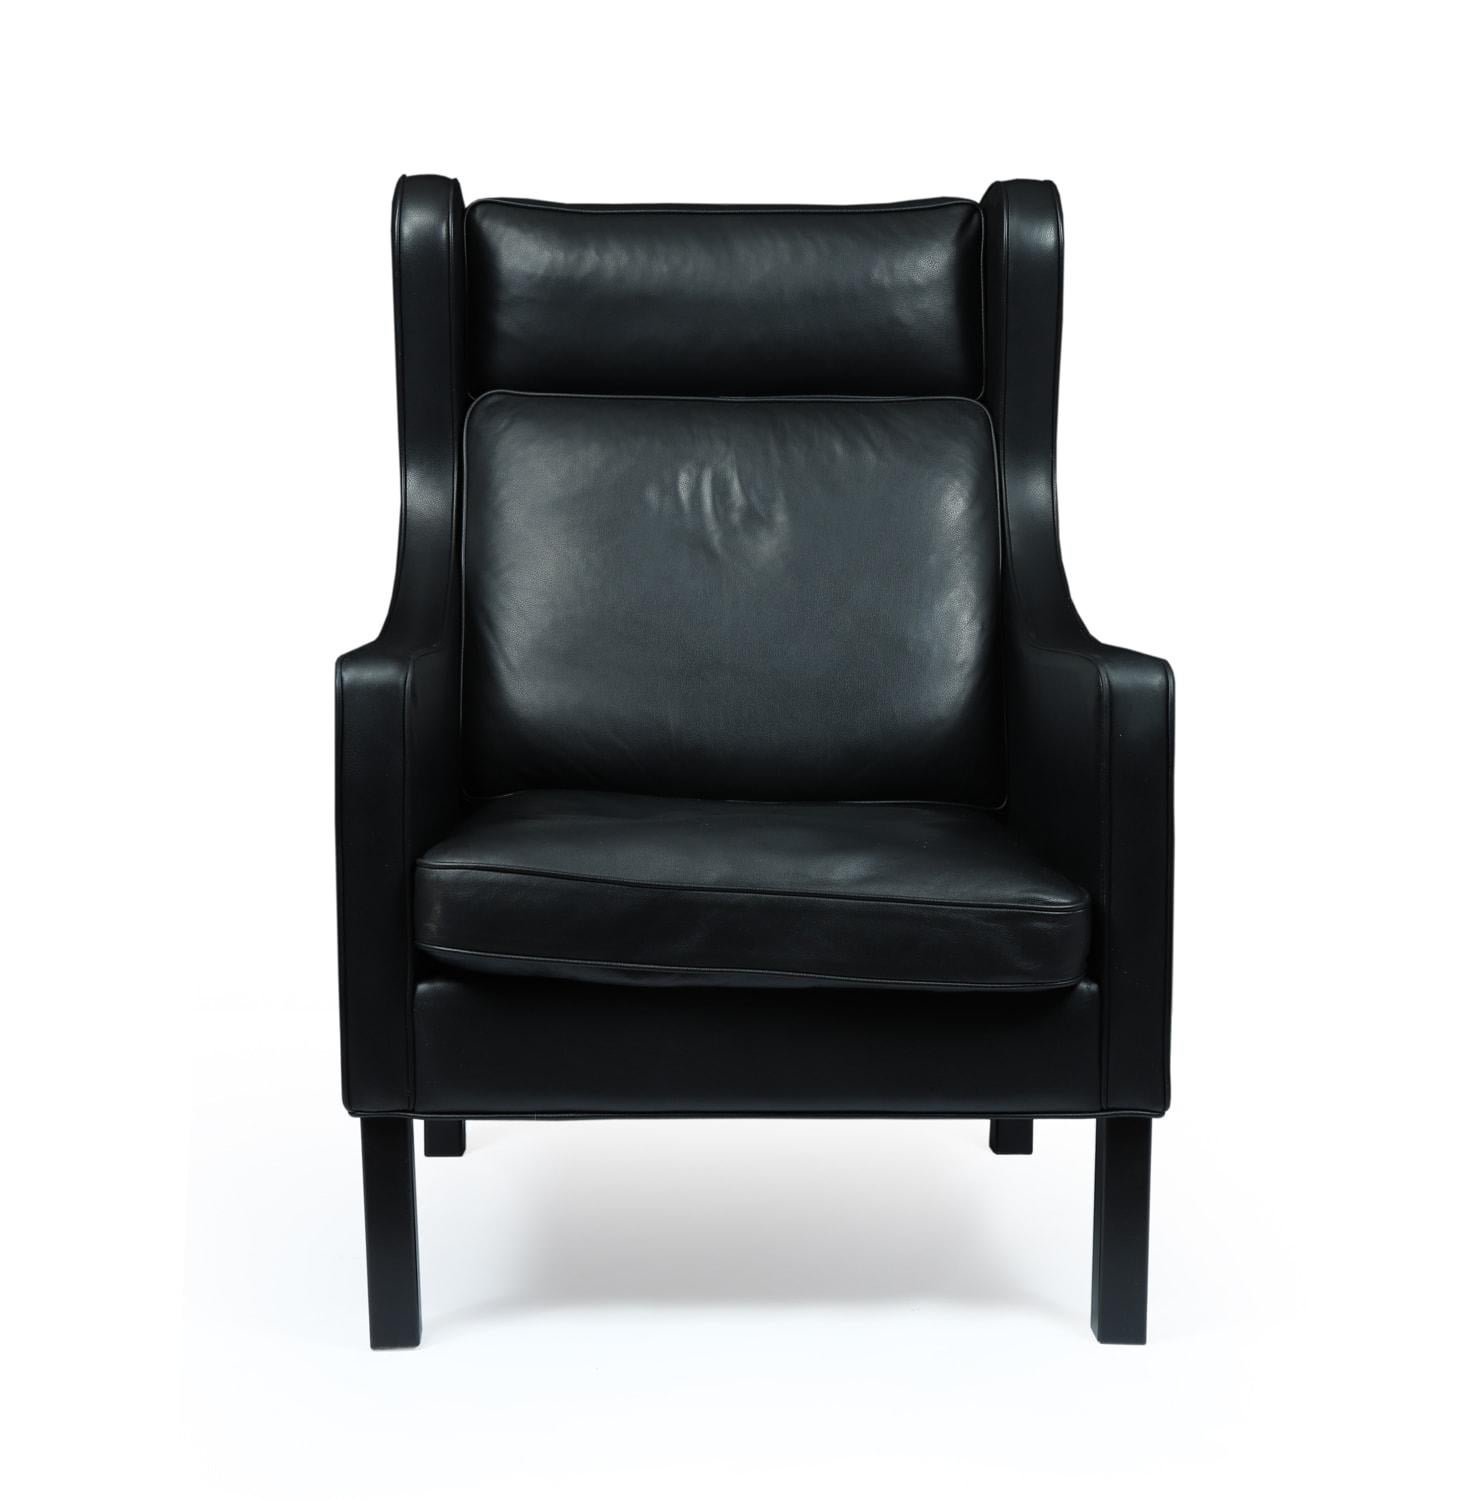 Danish wing chair in black leather by Hurup, circa 1980

This high back winged chair with black beech legs was produced in thick excellent quality, fully analine leather by the renowned furniture makers Hurup in Denmark, circa 1980s. The chair